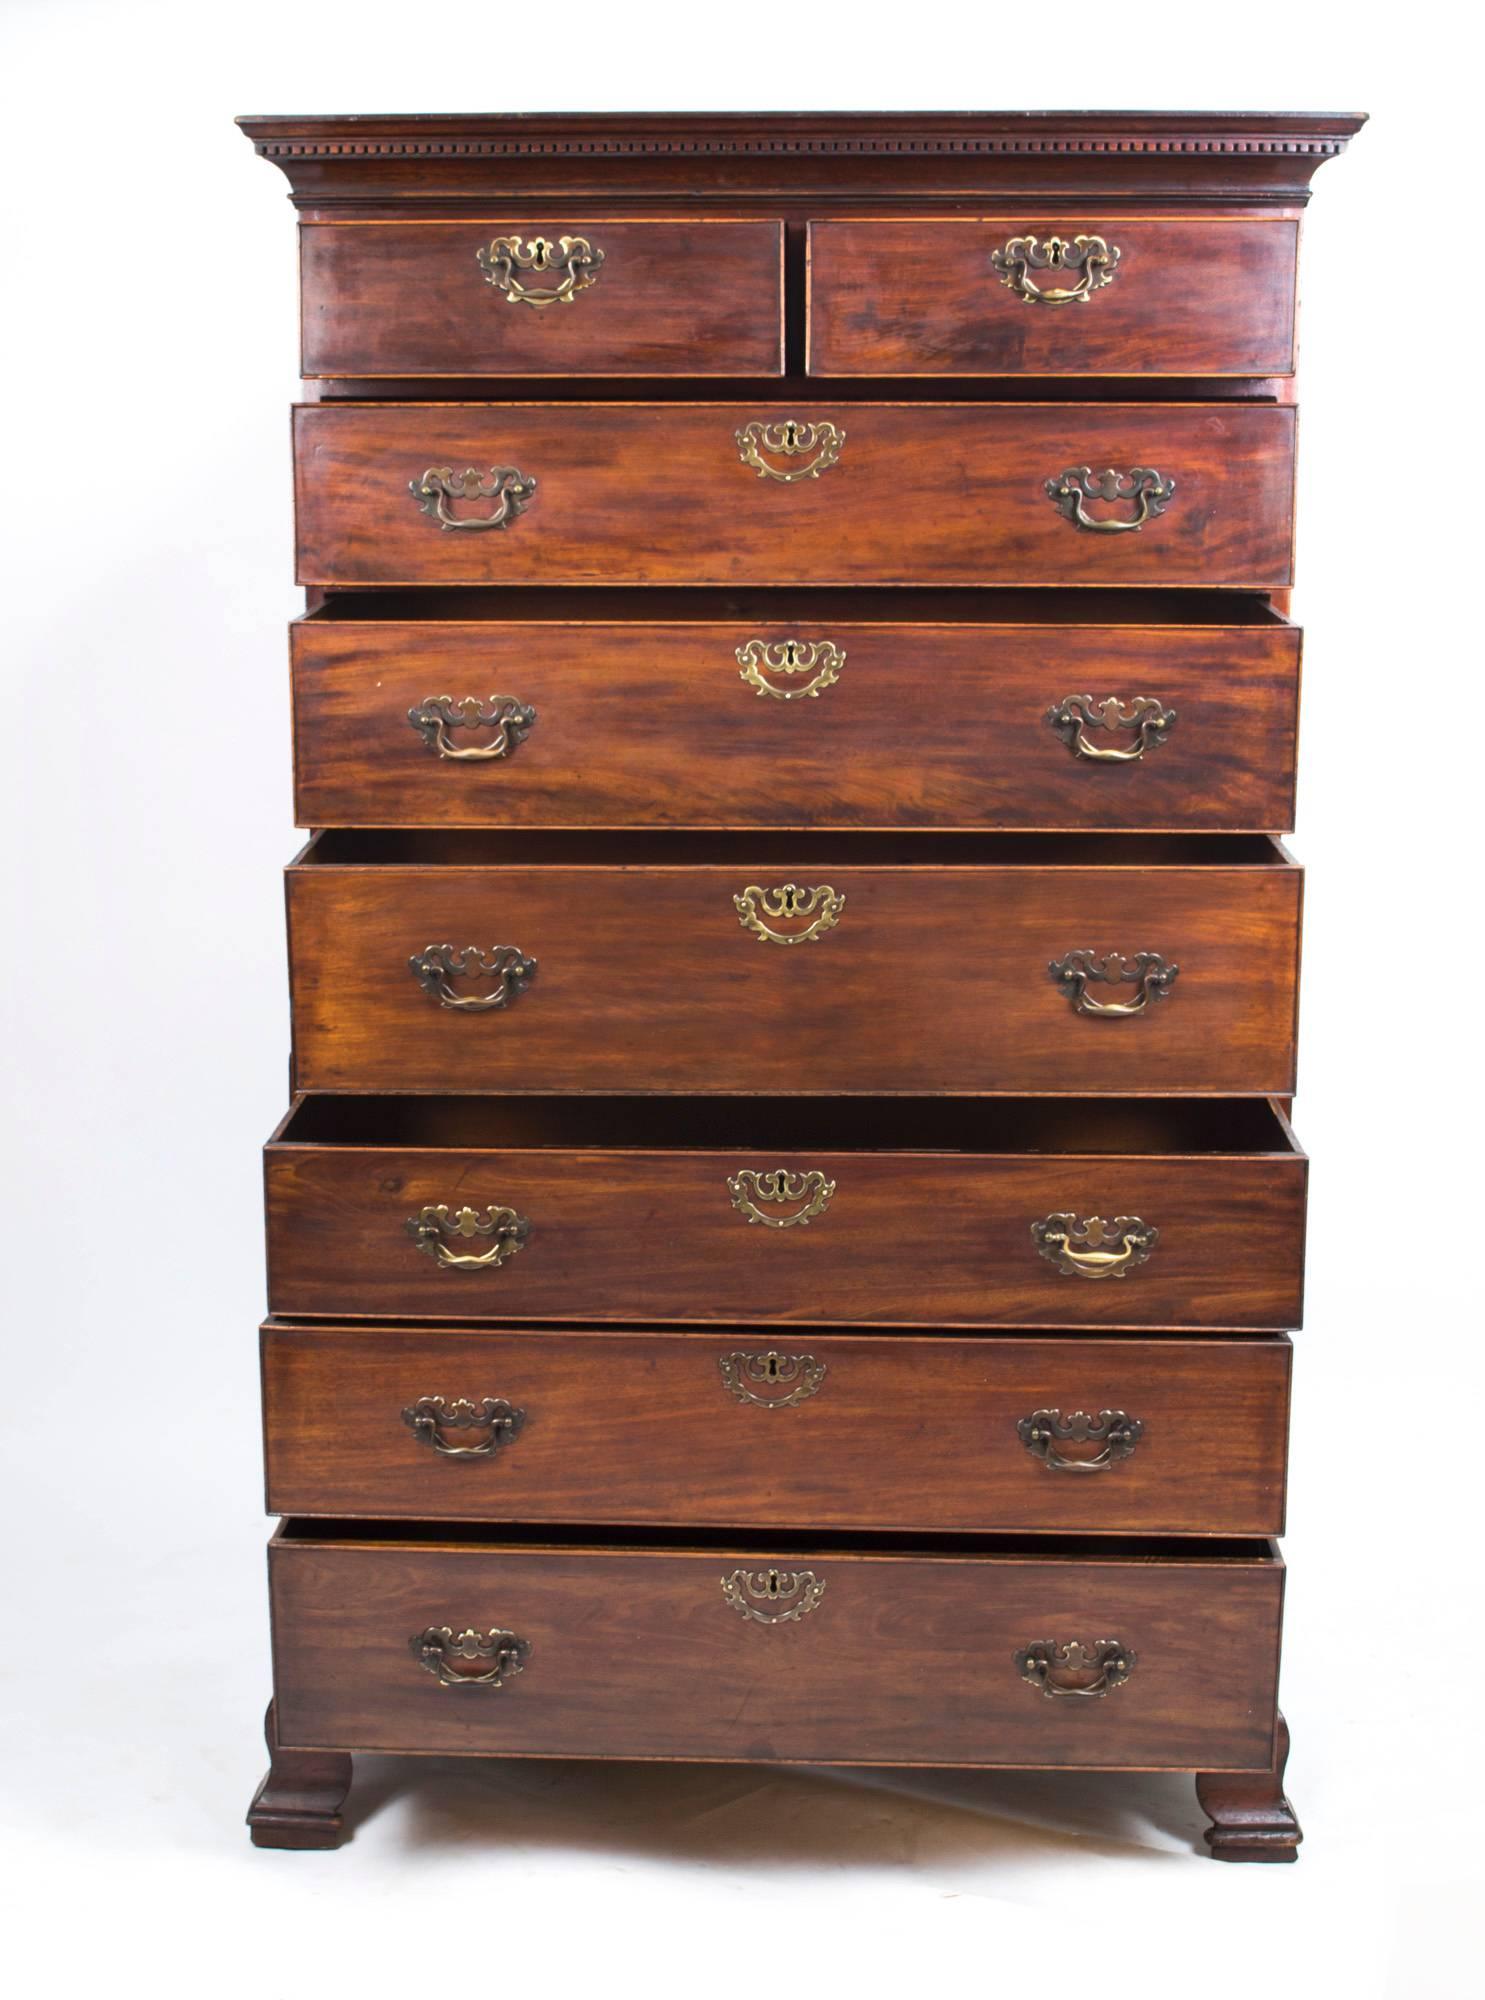 This is a beautiful antique George II mahogany Chippendale style chest on chest, circa 1740 in date.

It features two half width drawers above six capacious full width drawers and these provide ample storage. 

The drawers are oak lined with